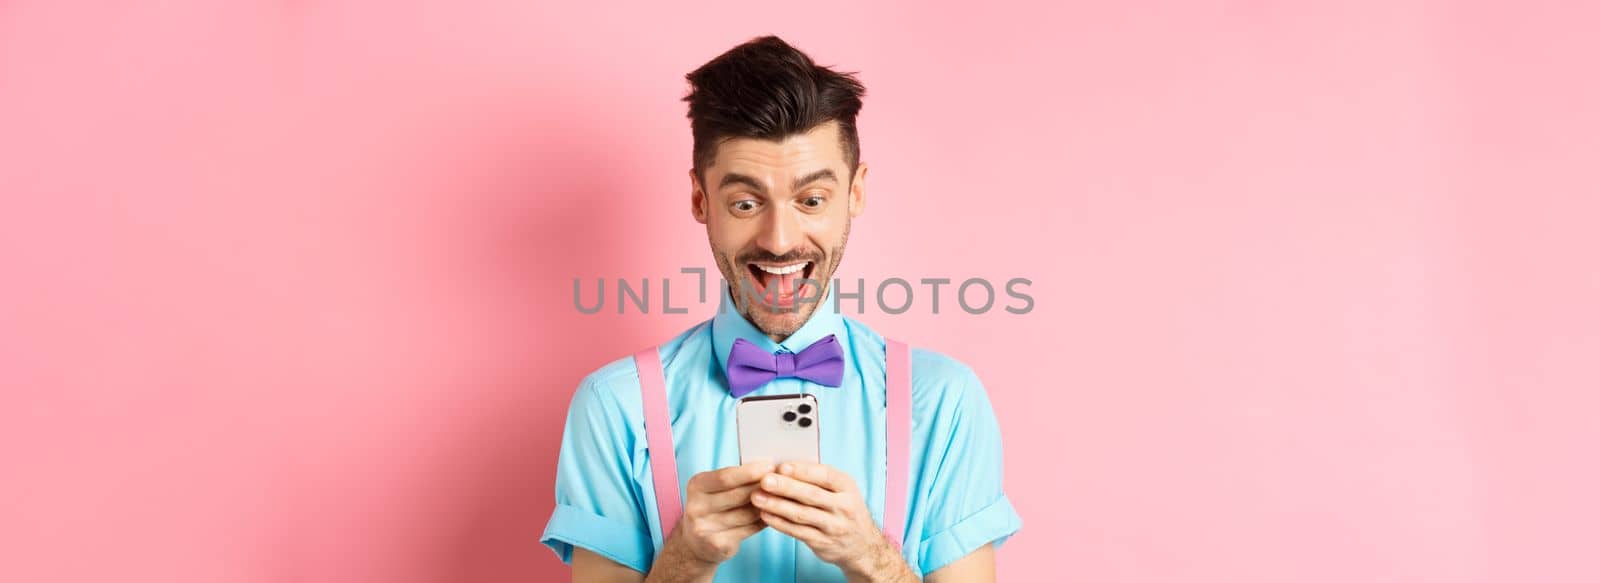 Technology concept. Cheerful young guy winning online prize, staring happy at smartphone screen, reading message amazed, standing on pink background.